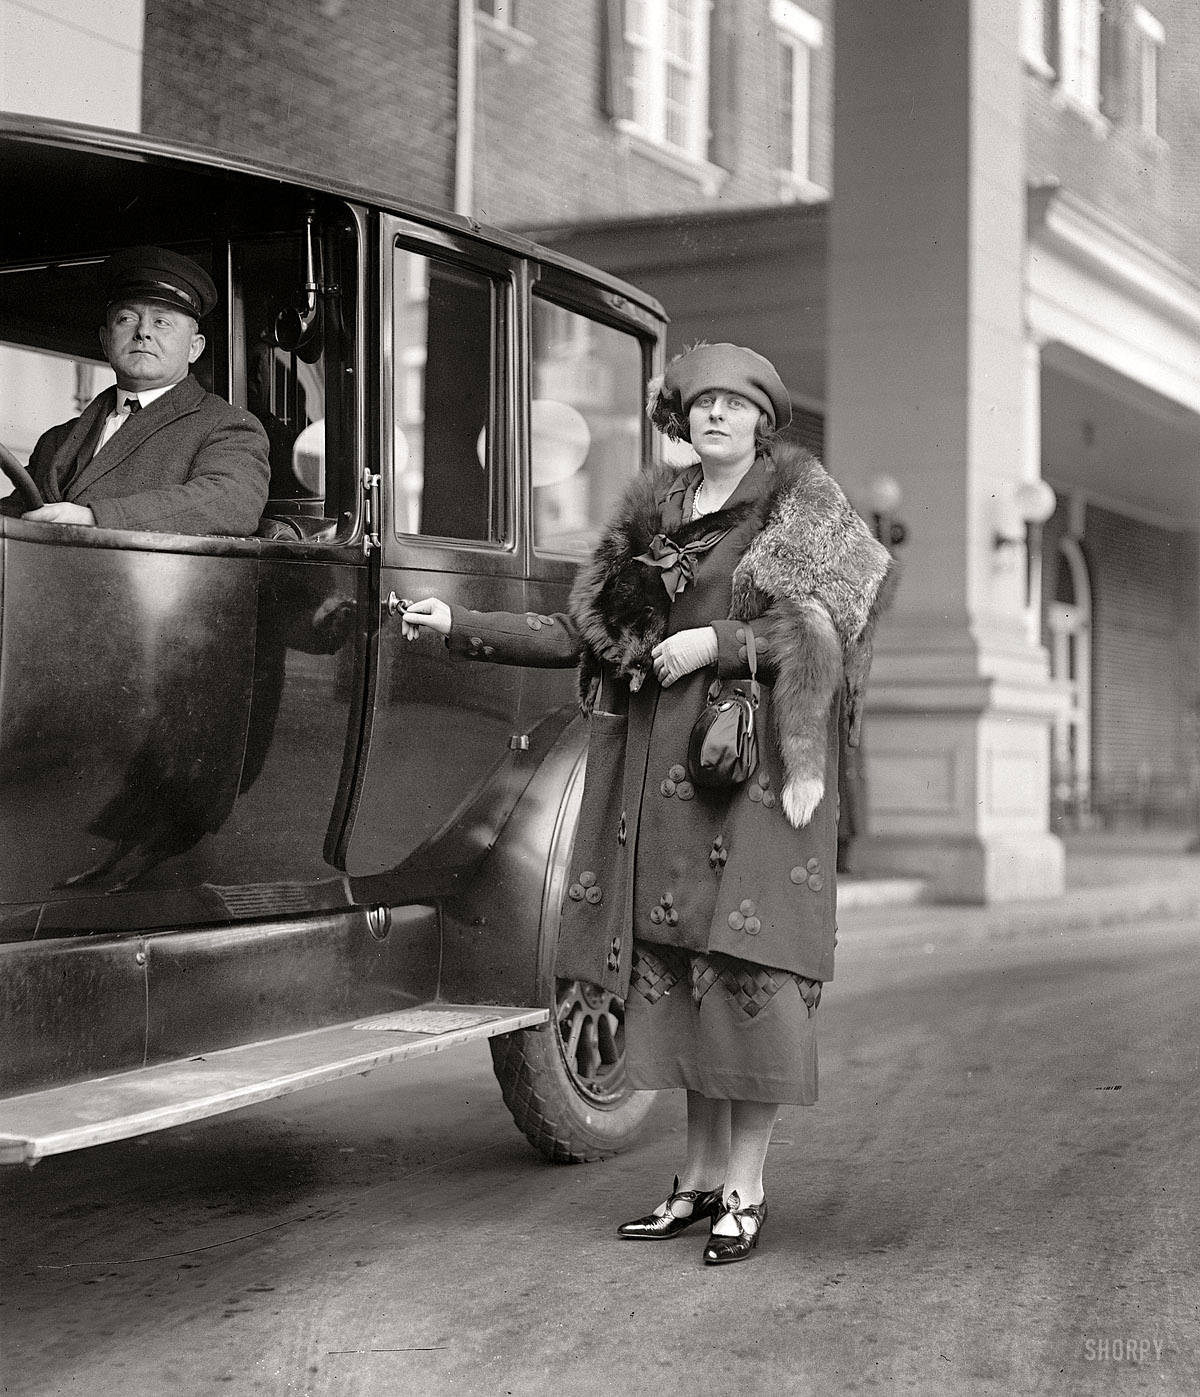 March 31, 1922. Washington, D.C. "Princess Andrea Boncompagni." Who before marrying her Prince in 1916 was Miss Margaret Preston Draper, "richest heiress in New England." A few months after this picture was taken, the Prince went to the Vatican to have their union annulled. National Photo Co. View full size.